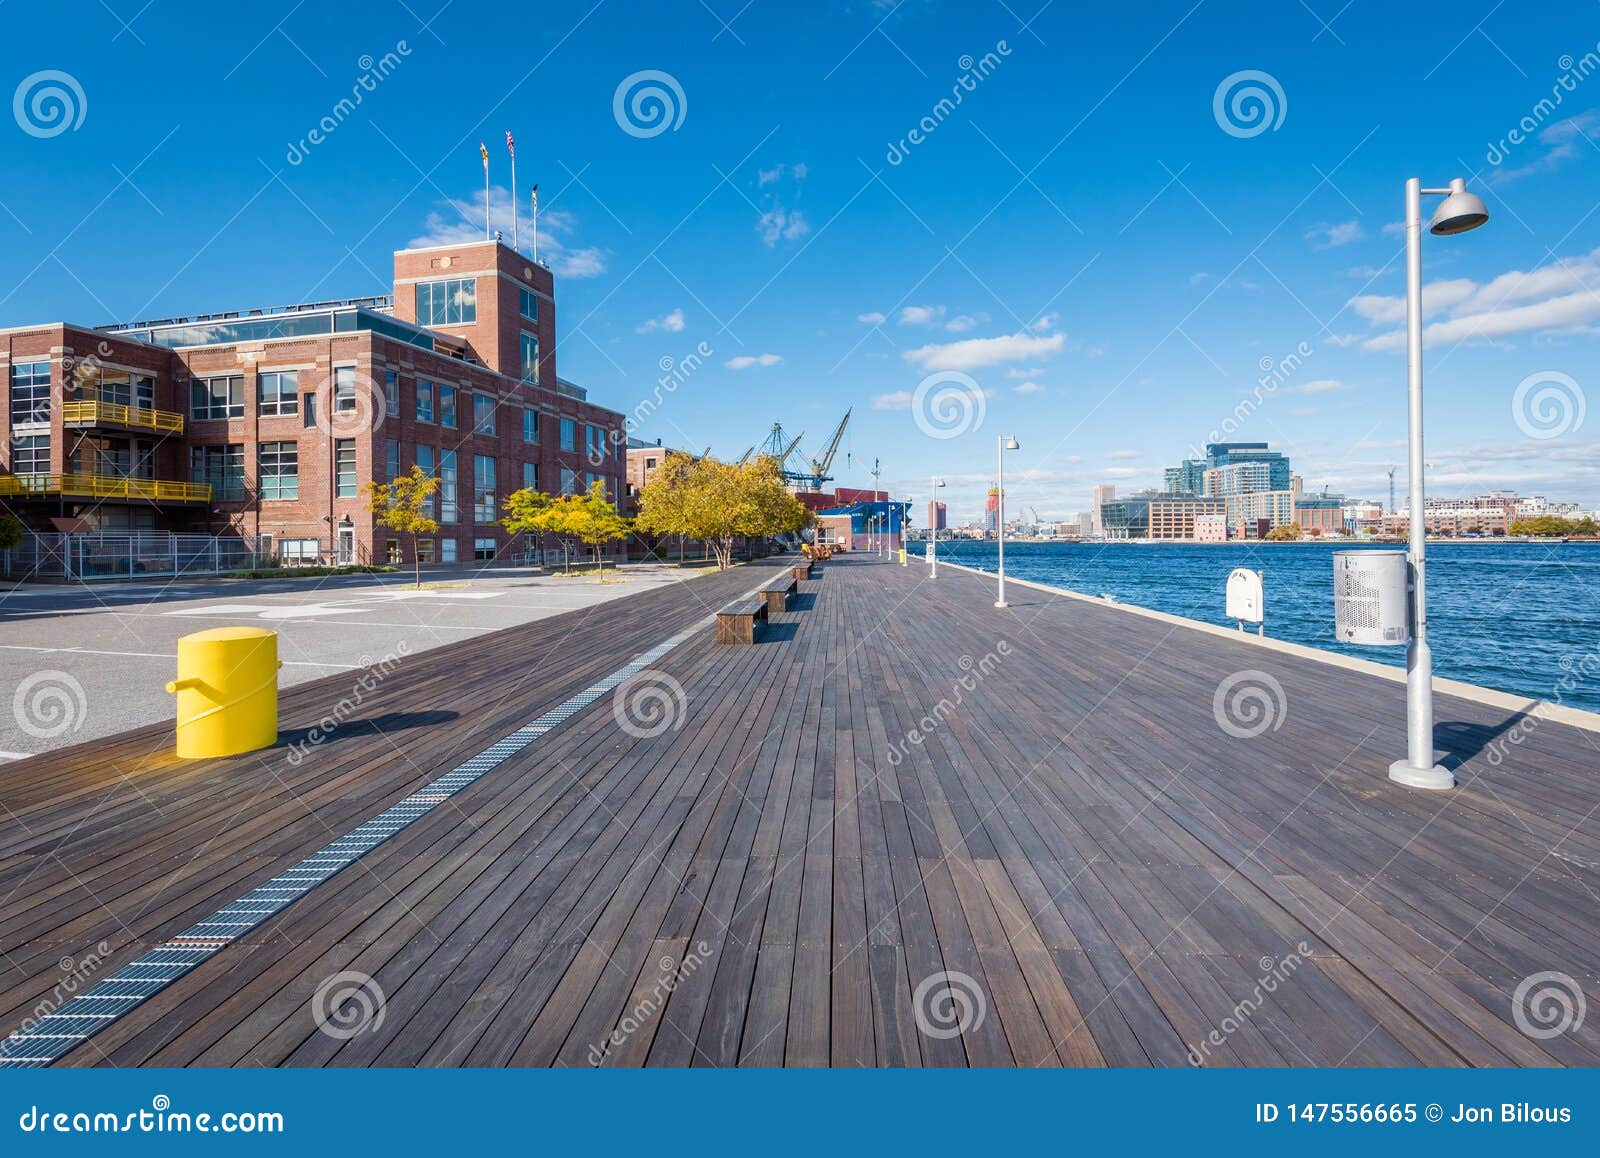 verkrachting Methode Meter Waterfront Promenade at Under Armour Global Headquarters, in Baltimore,  Maryland Editorial Image - Image of tourism, perspective: 147556665